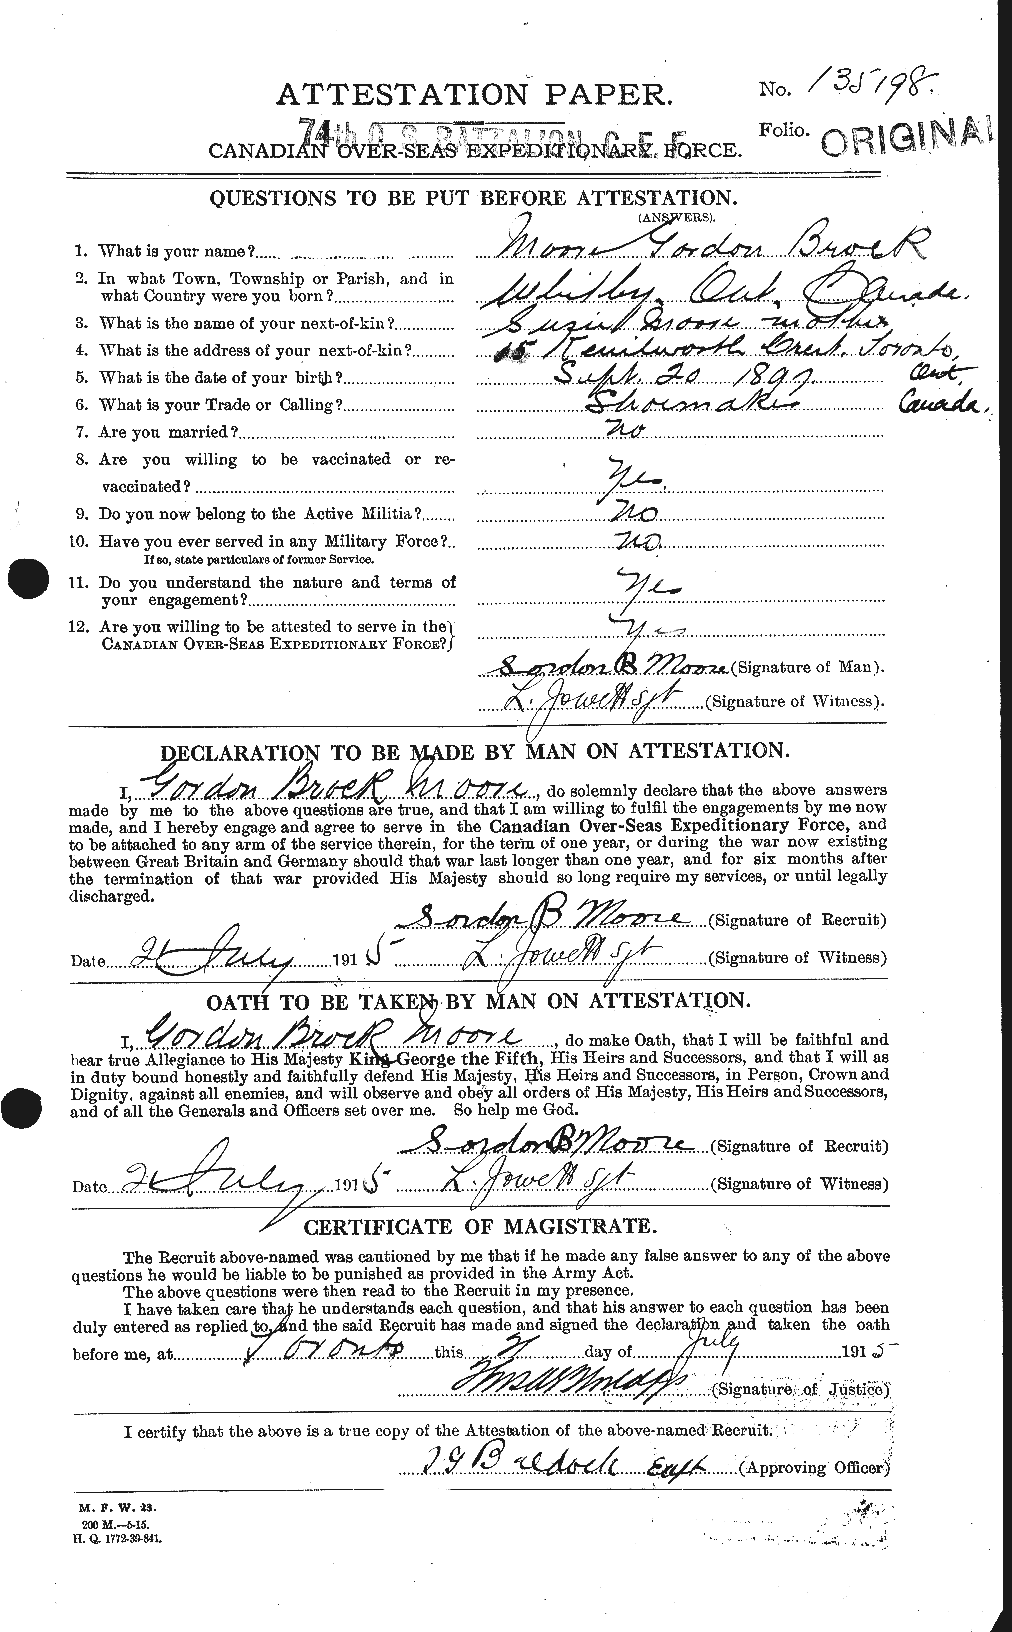 Personnel Records of the First World War - CEF 502045a